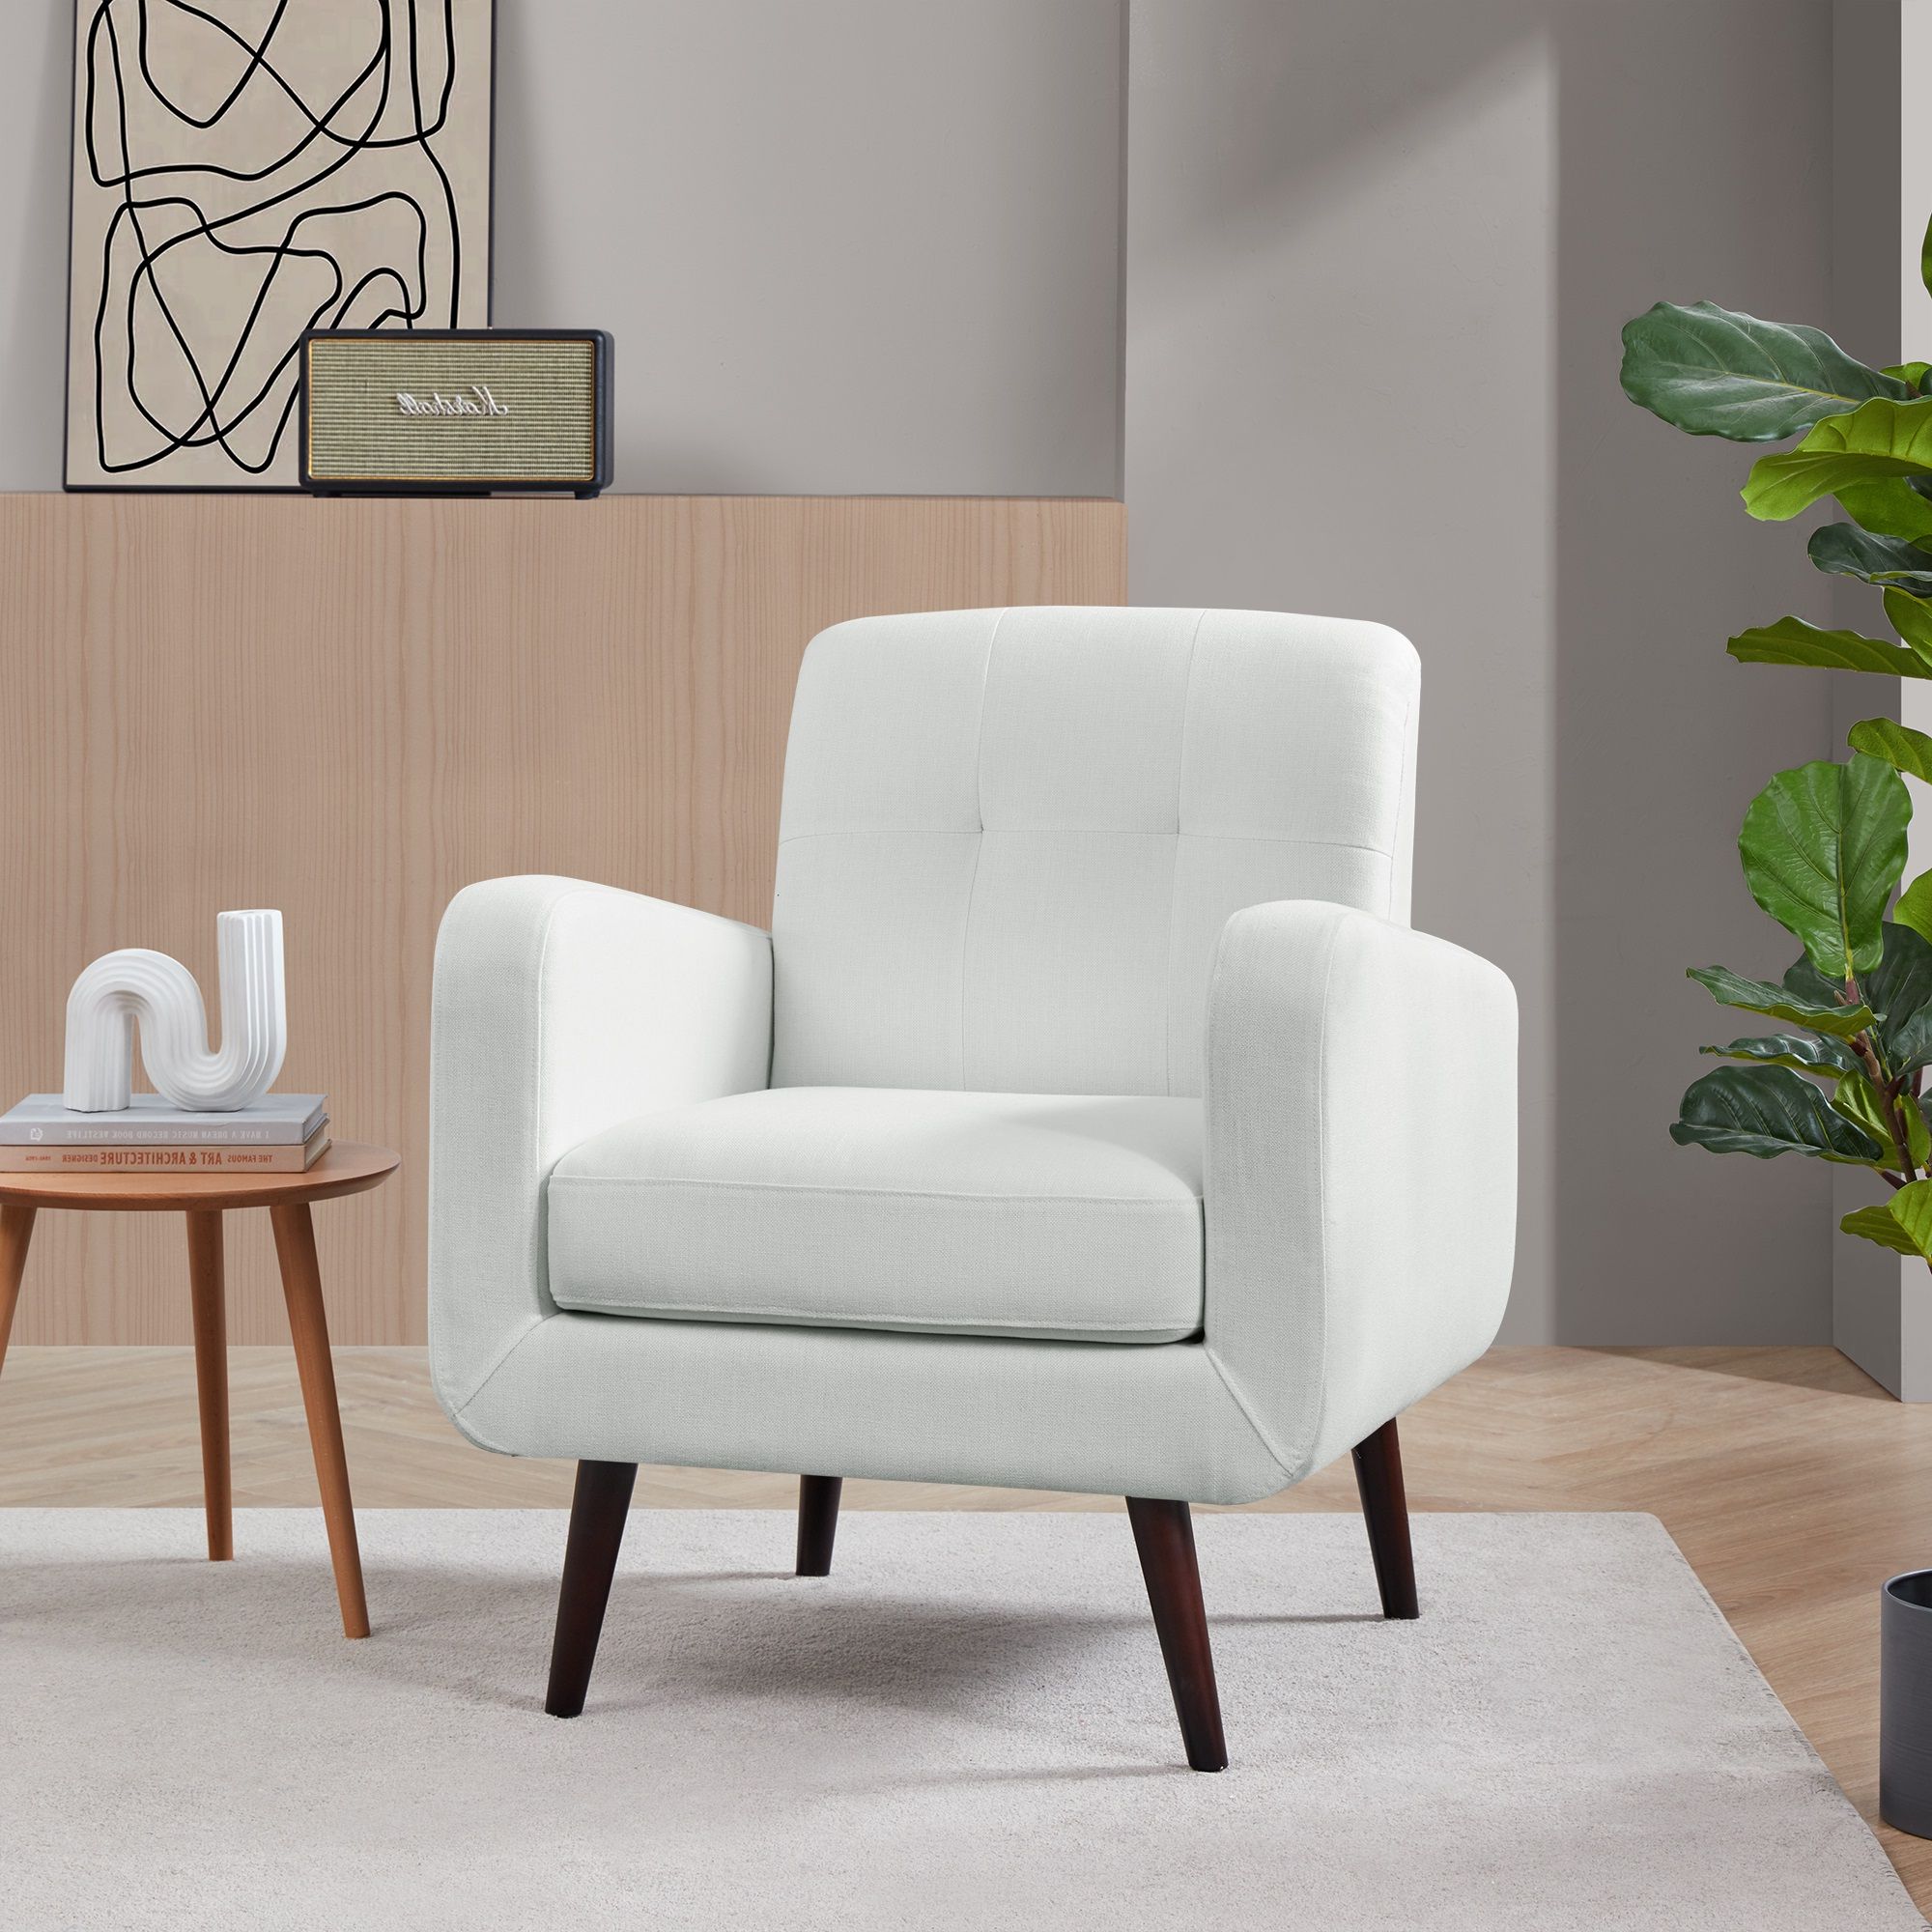 Belleze Hasting Arm Chair Comfy Fabric Upholstered Tufted Accent Chair For Recent White Textured Round Accent Stools (View 4 of 10)